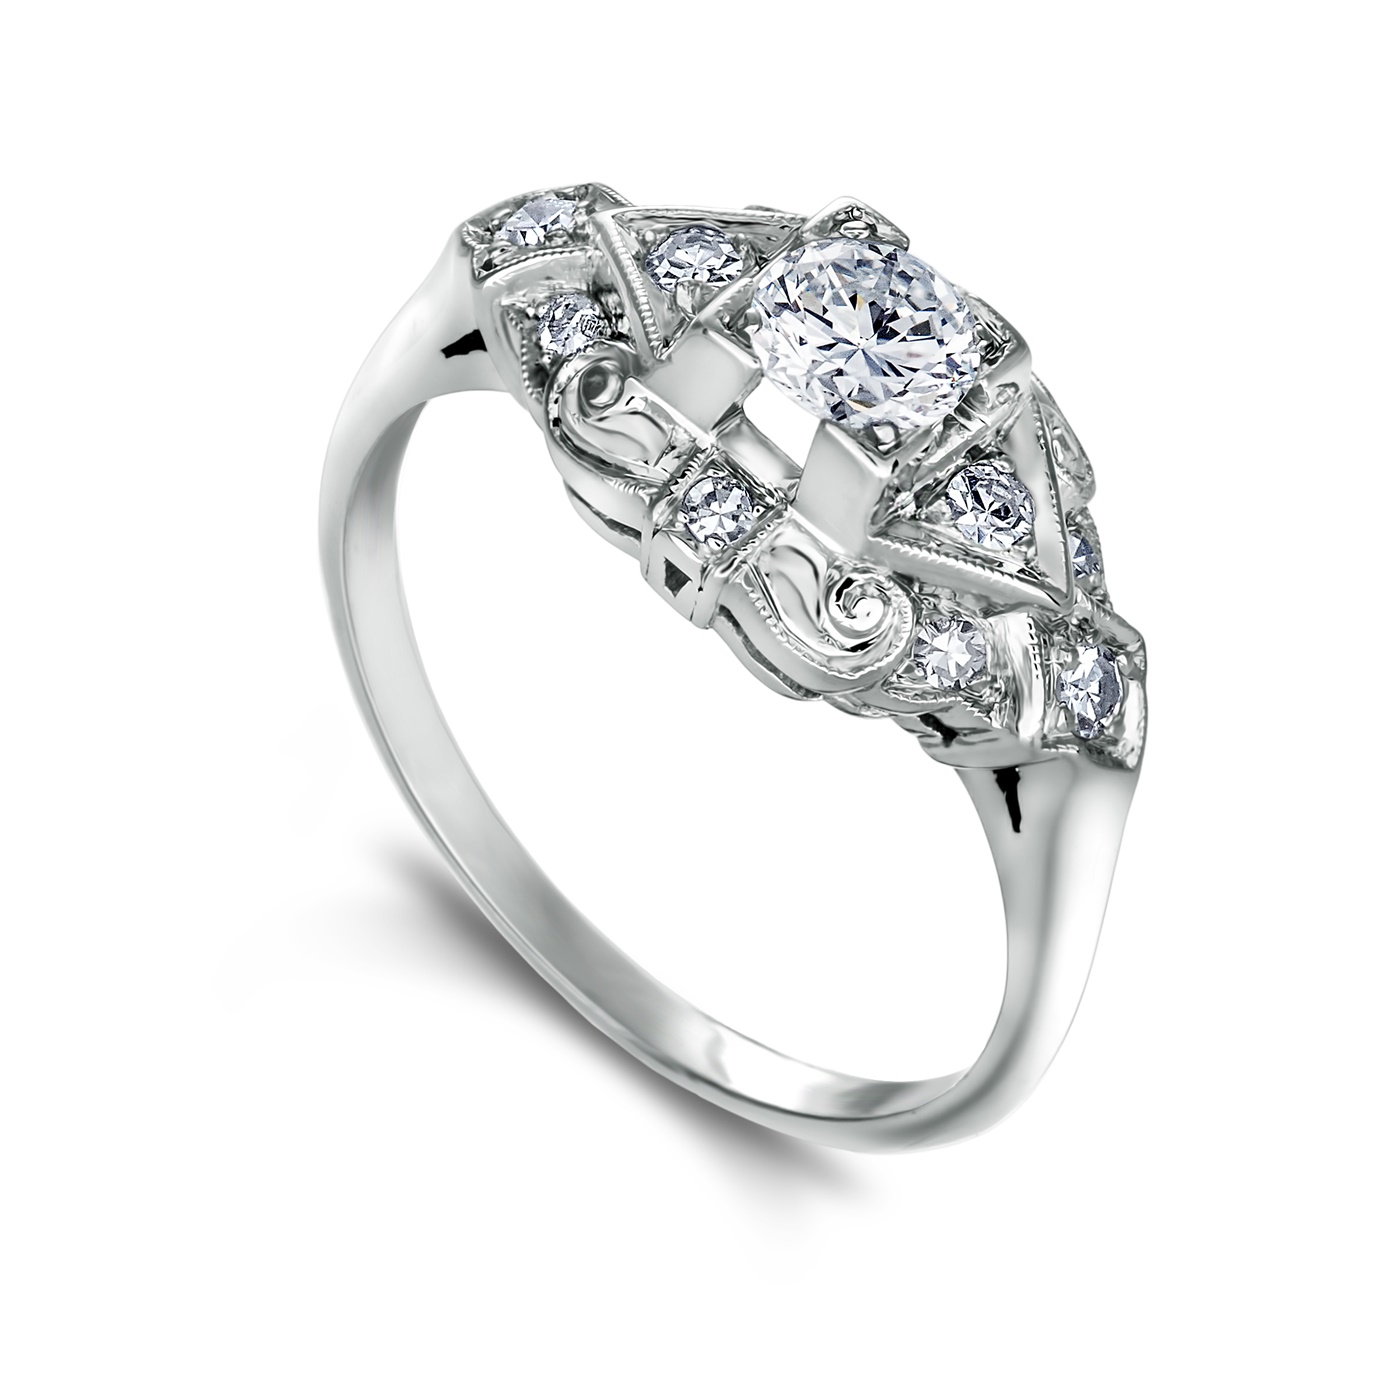 Vintage Platinum and Diamond Engagement Ring - only $1195